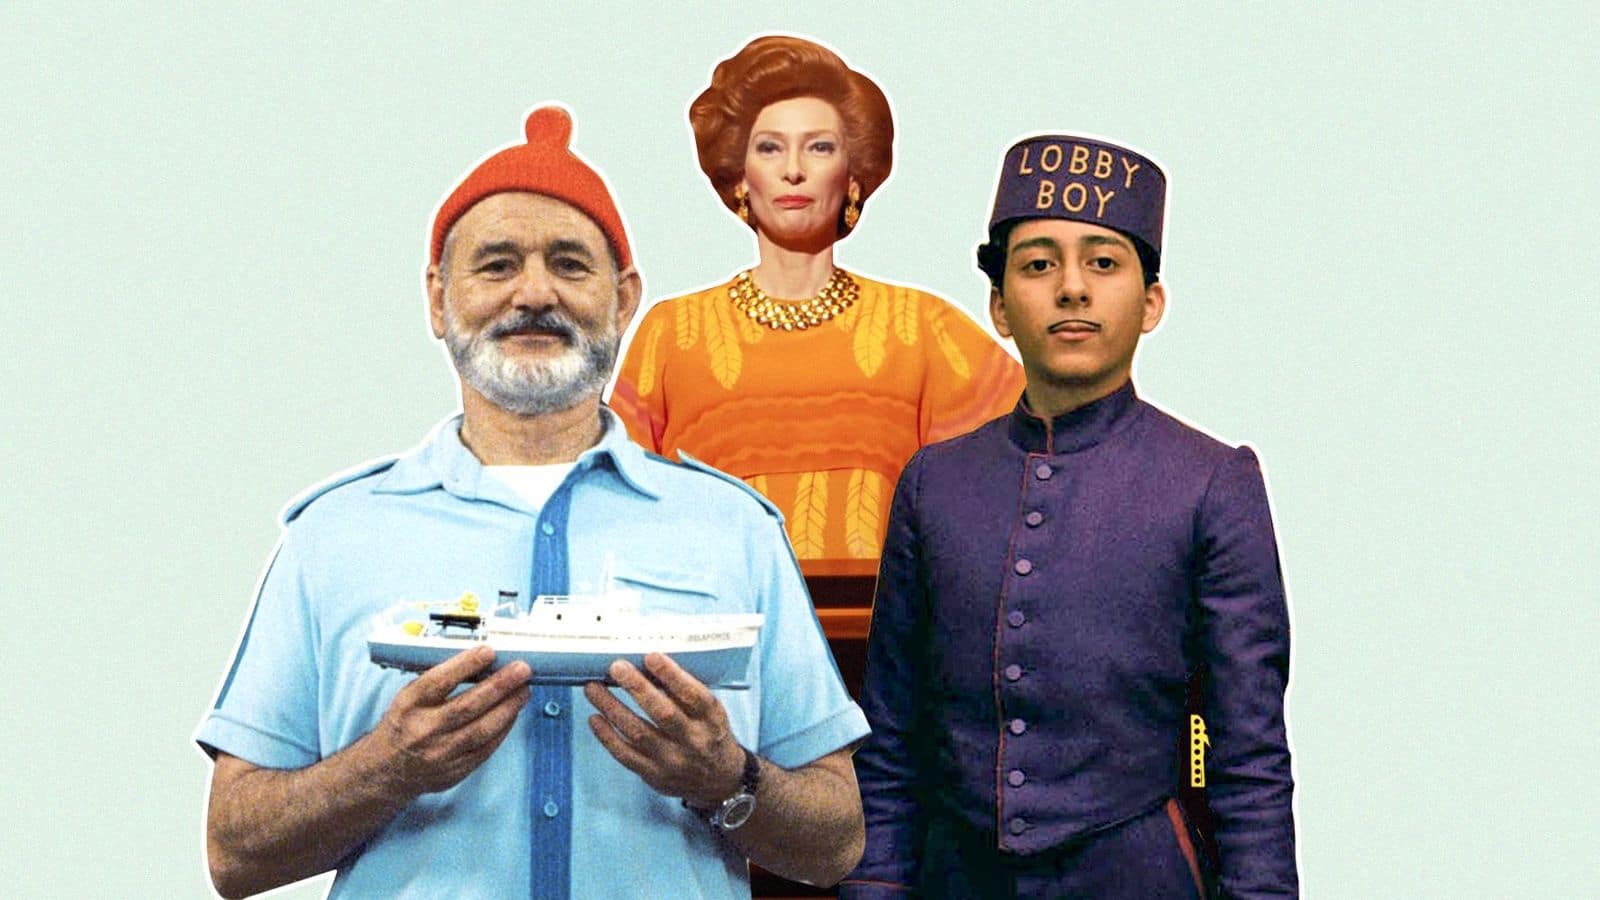 Wes Anderson's films that you just can't miss out on